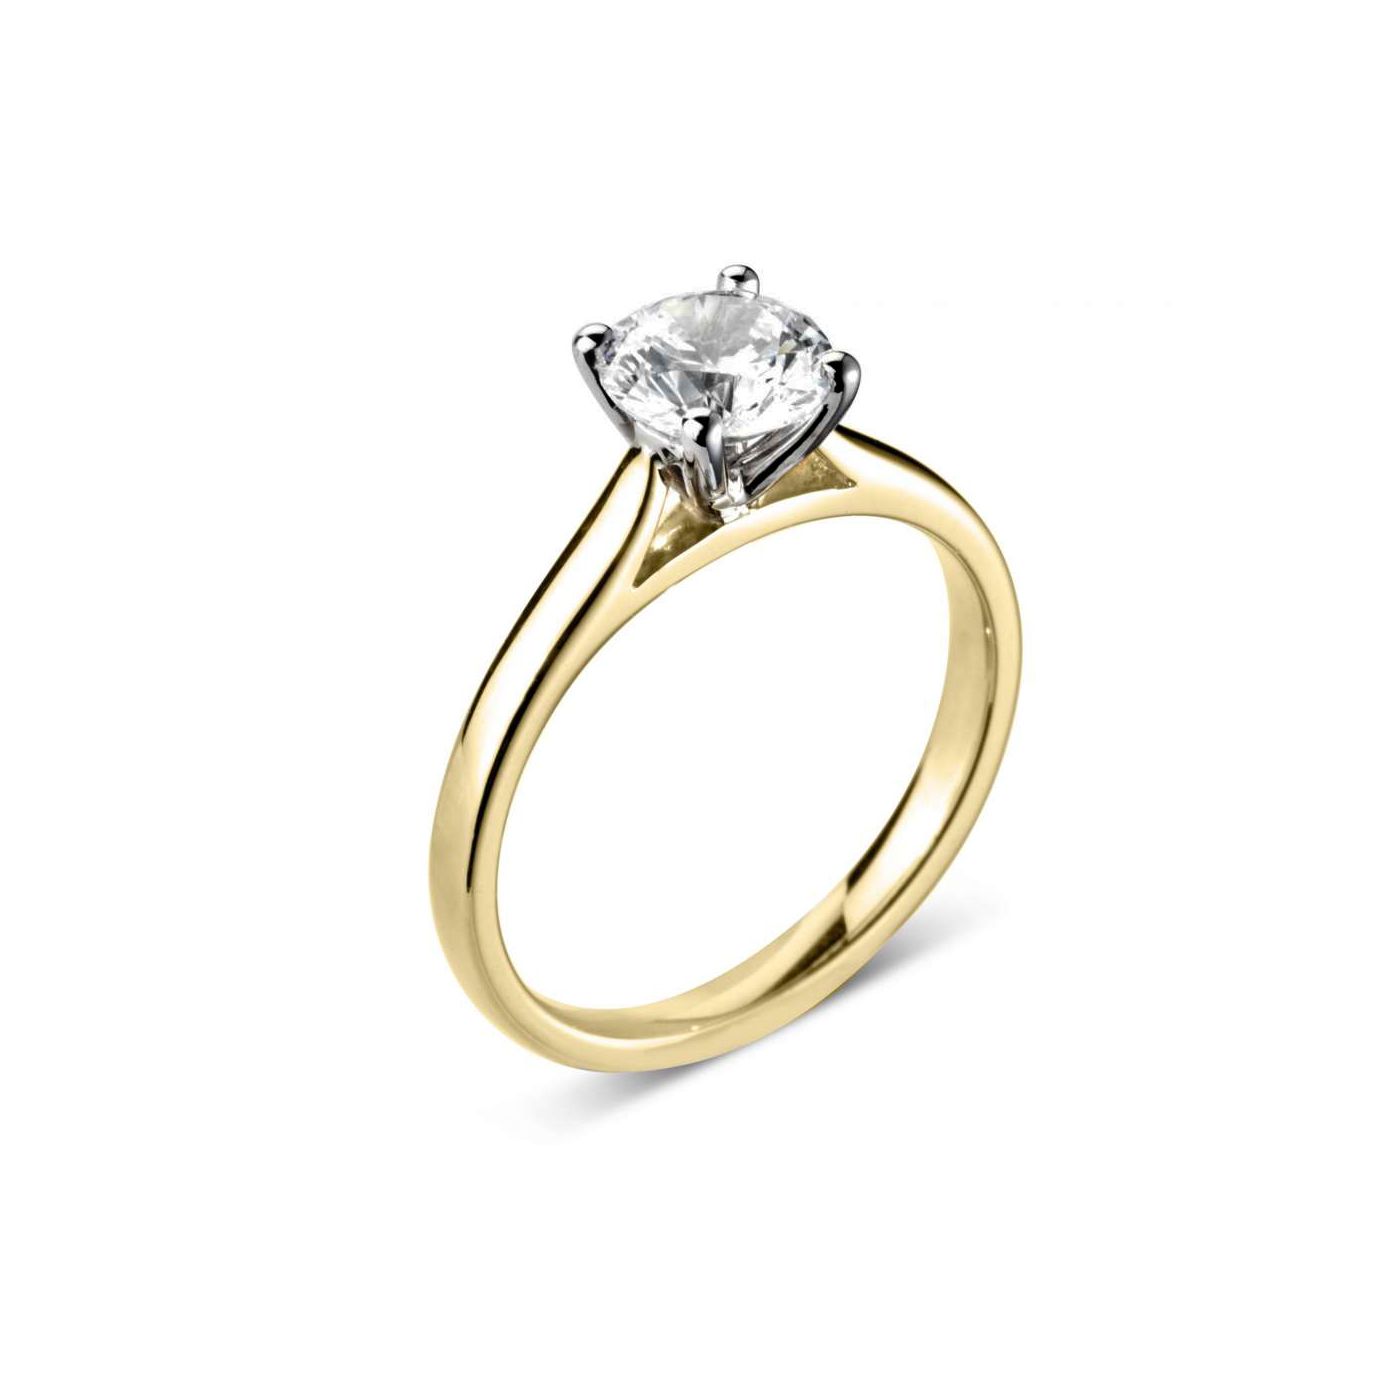 Couture - 18ct. Yellow Gold Solitaire Diamond Engagement Ring - 1.01cts